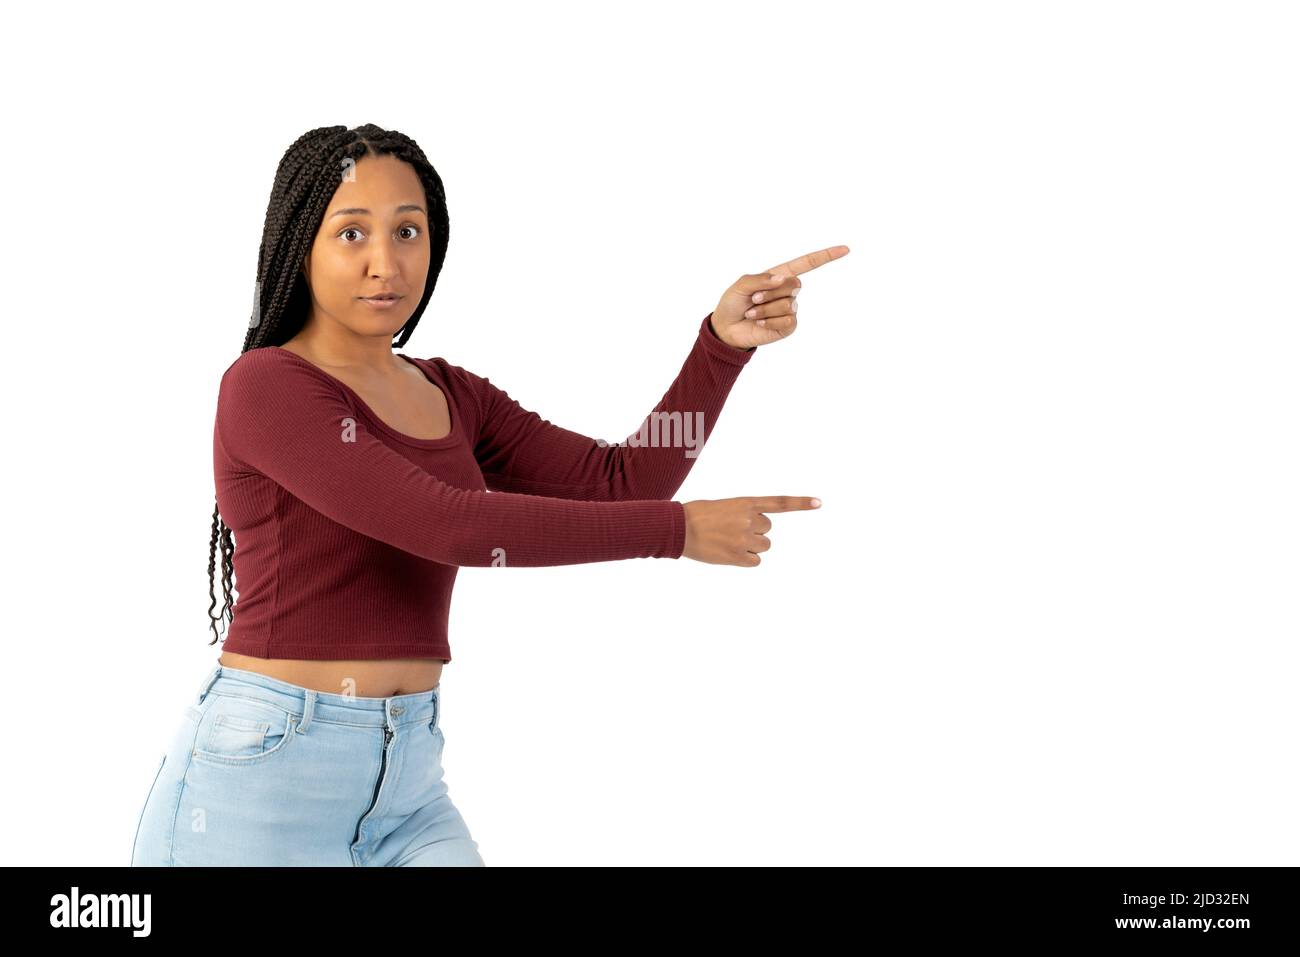 Young black woman with casual clothing in white background pointing to the right Stock Photo